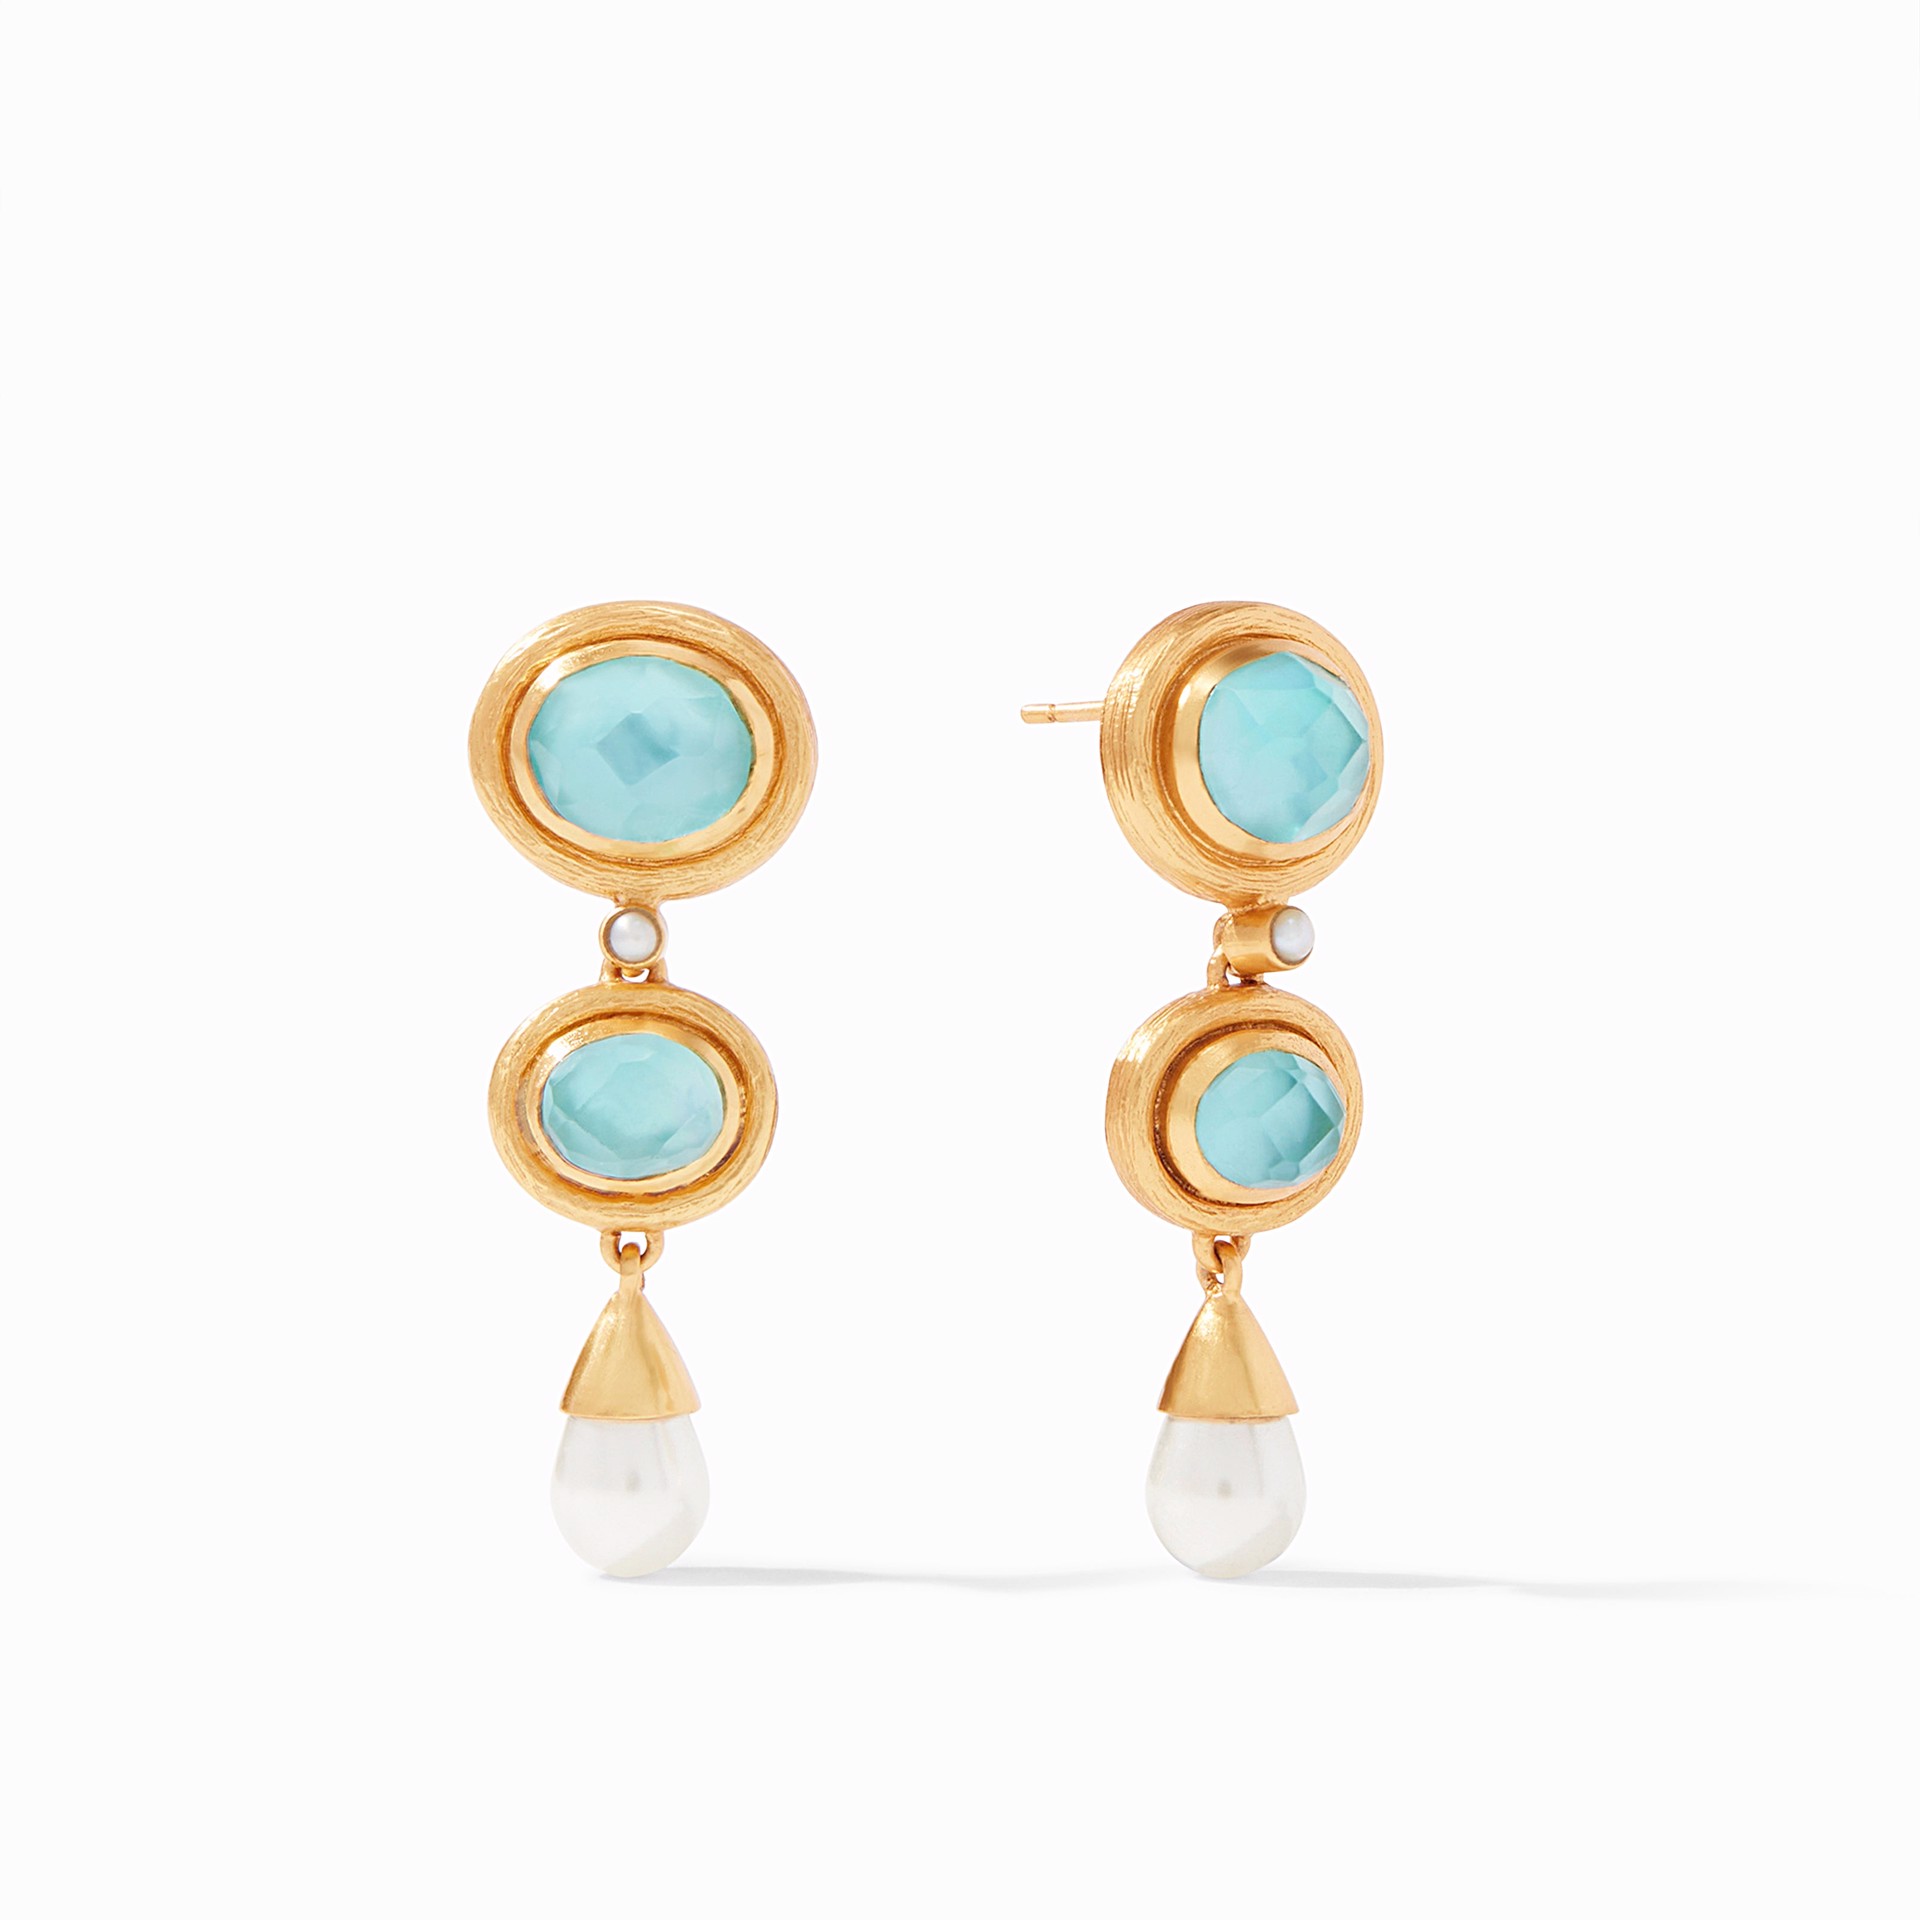 Simone Tier Earring - Iridescent Bahamian Blue by Julie Vos